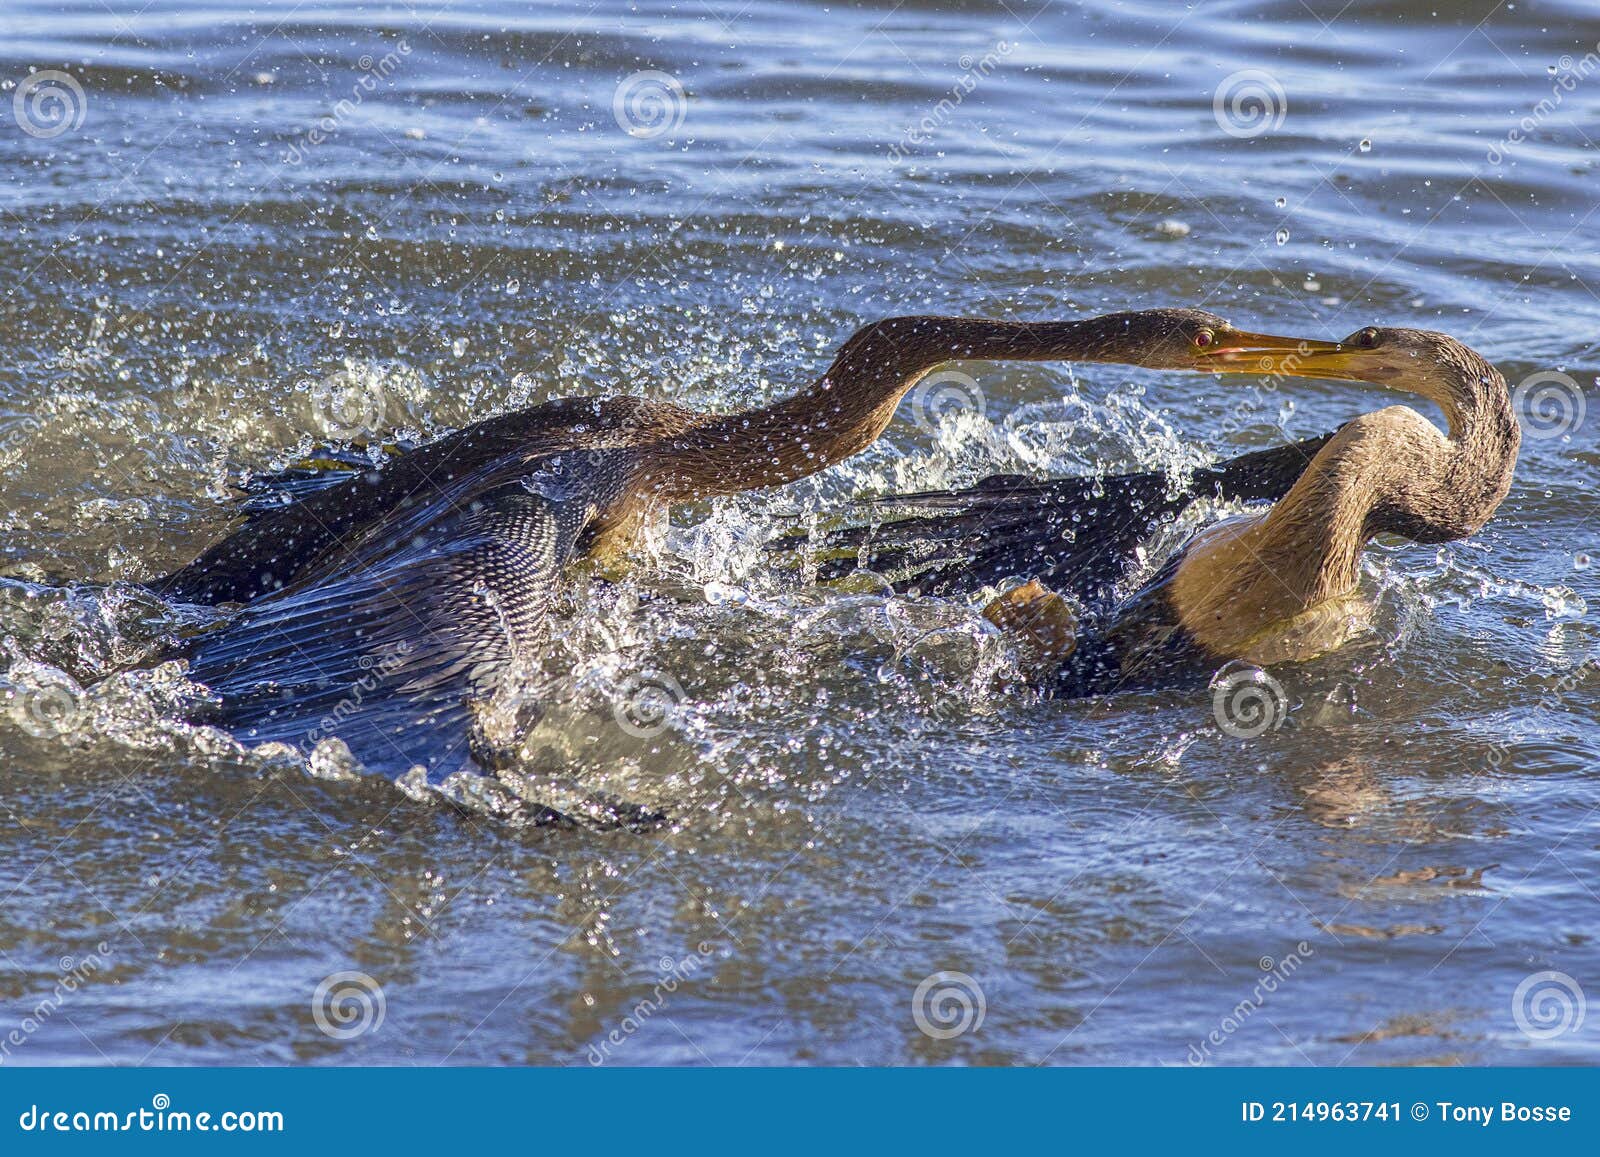 anhingas, snakebirds territorial fight